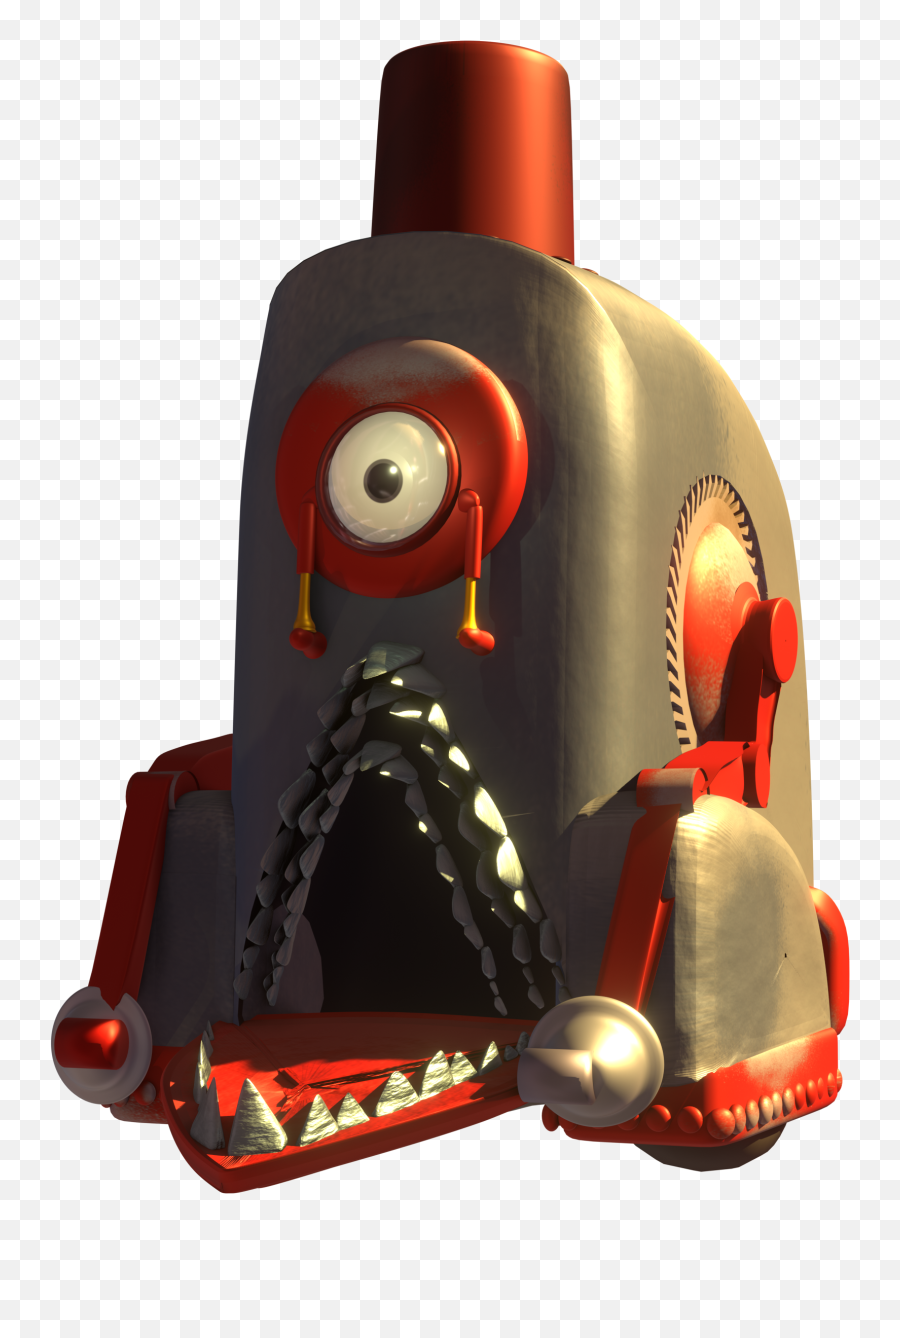 The Sweeper Updated Version From Robots Film Rblender Emoji,Sussy Emoji Copy And Paste